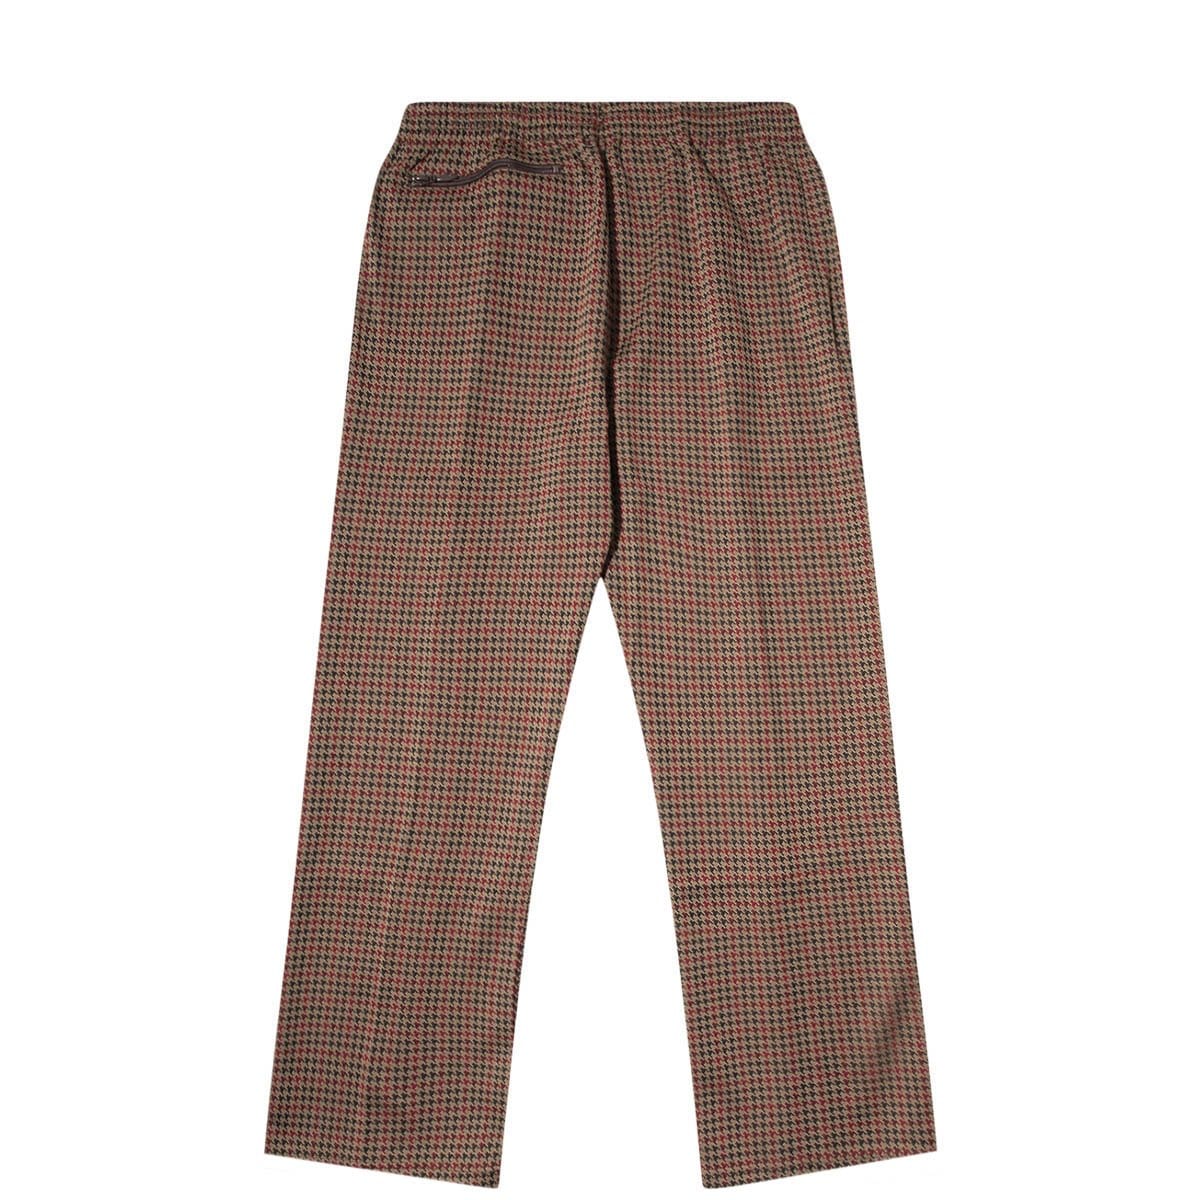 Needles Bottoms TRACK PANT - POLY JACQUARD HOUNDSTOOTH